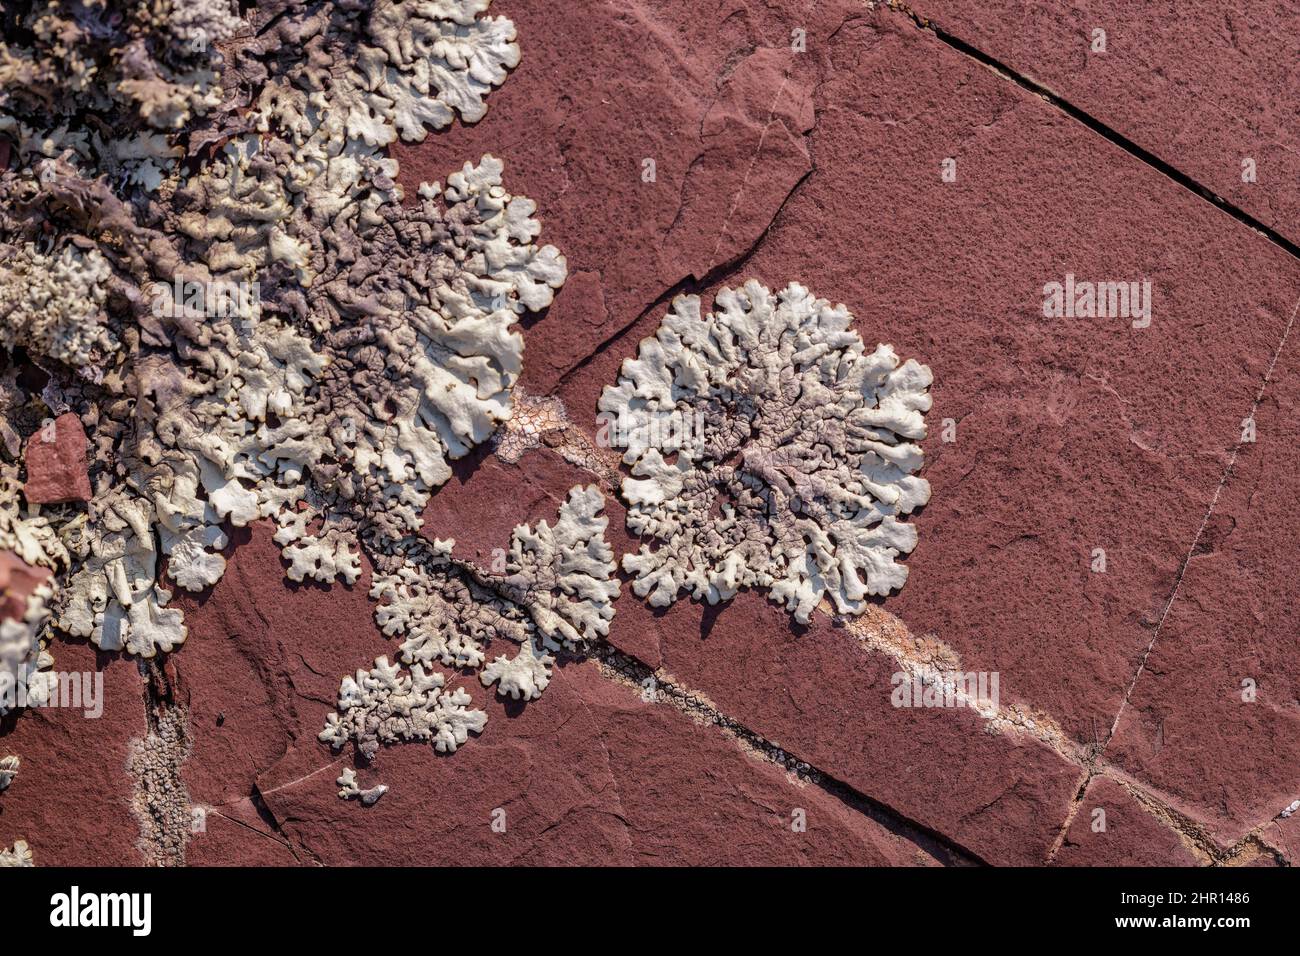 Foliose lichens (Xanthoparmelia stenophylla) on red pelites, Gorges de Daluis, Southern Alps, France Stock Photo